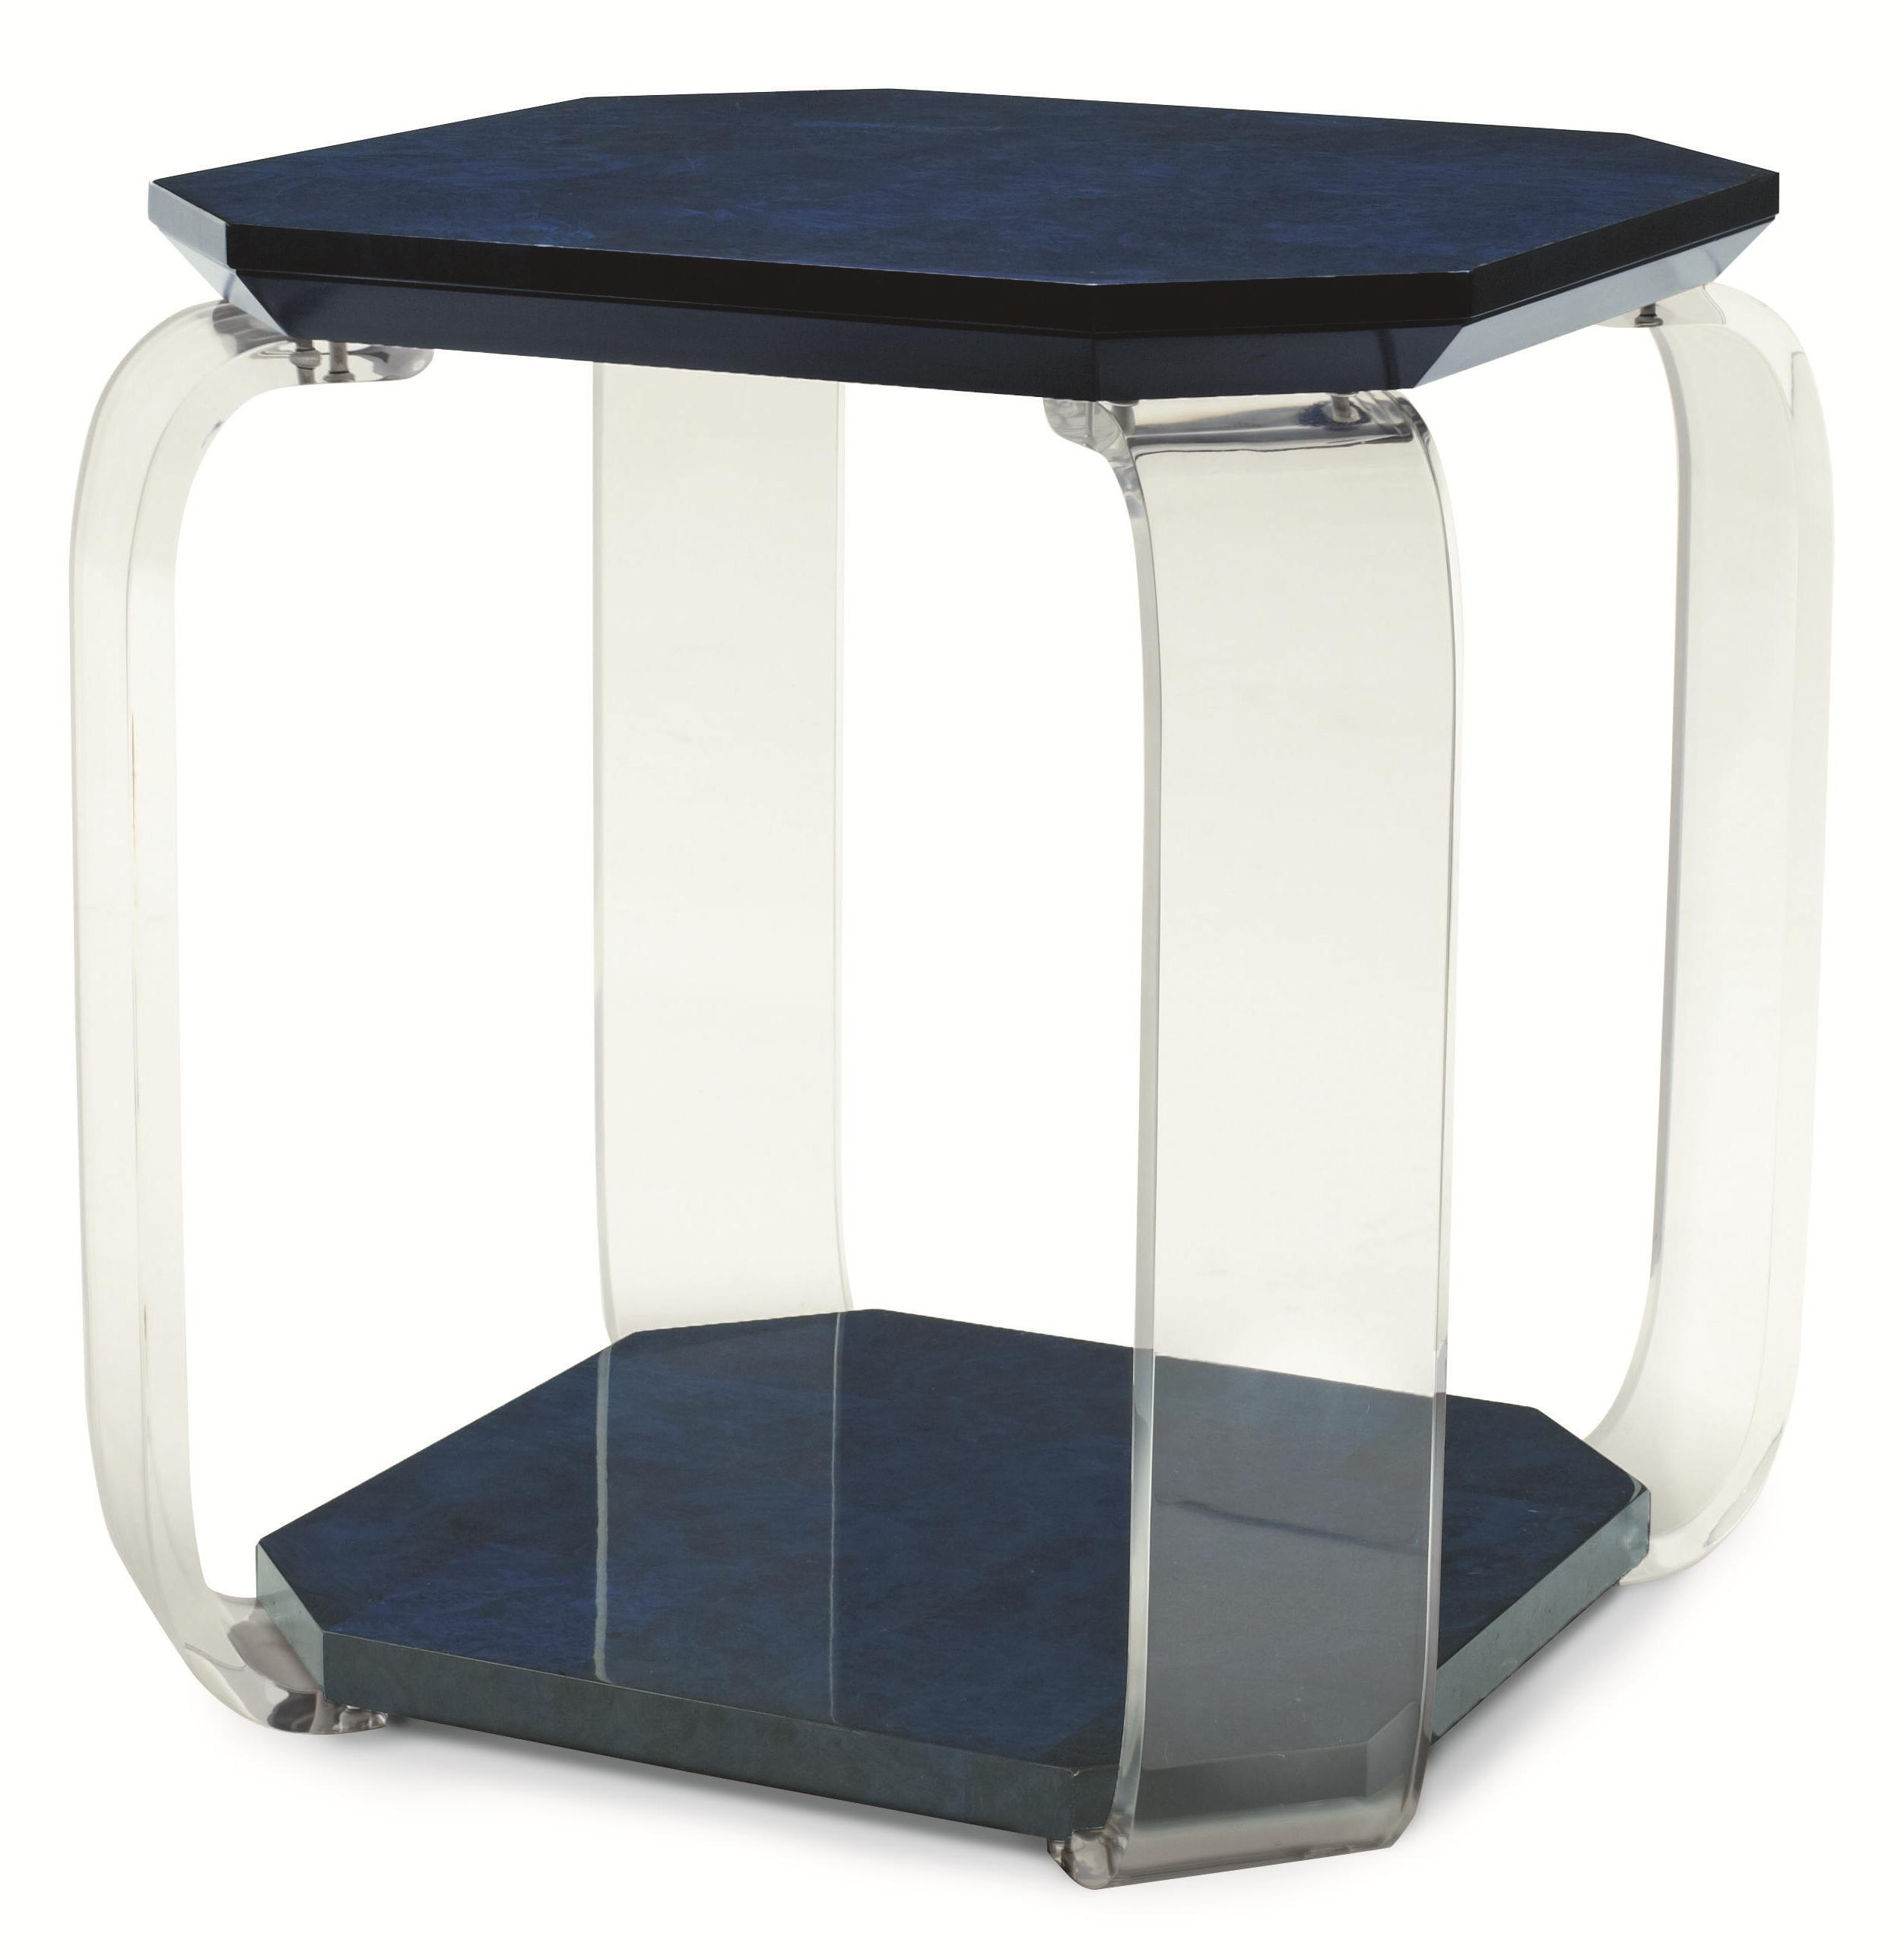 Colored Octagon Chairside Table with Flat Acrylic Legs